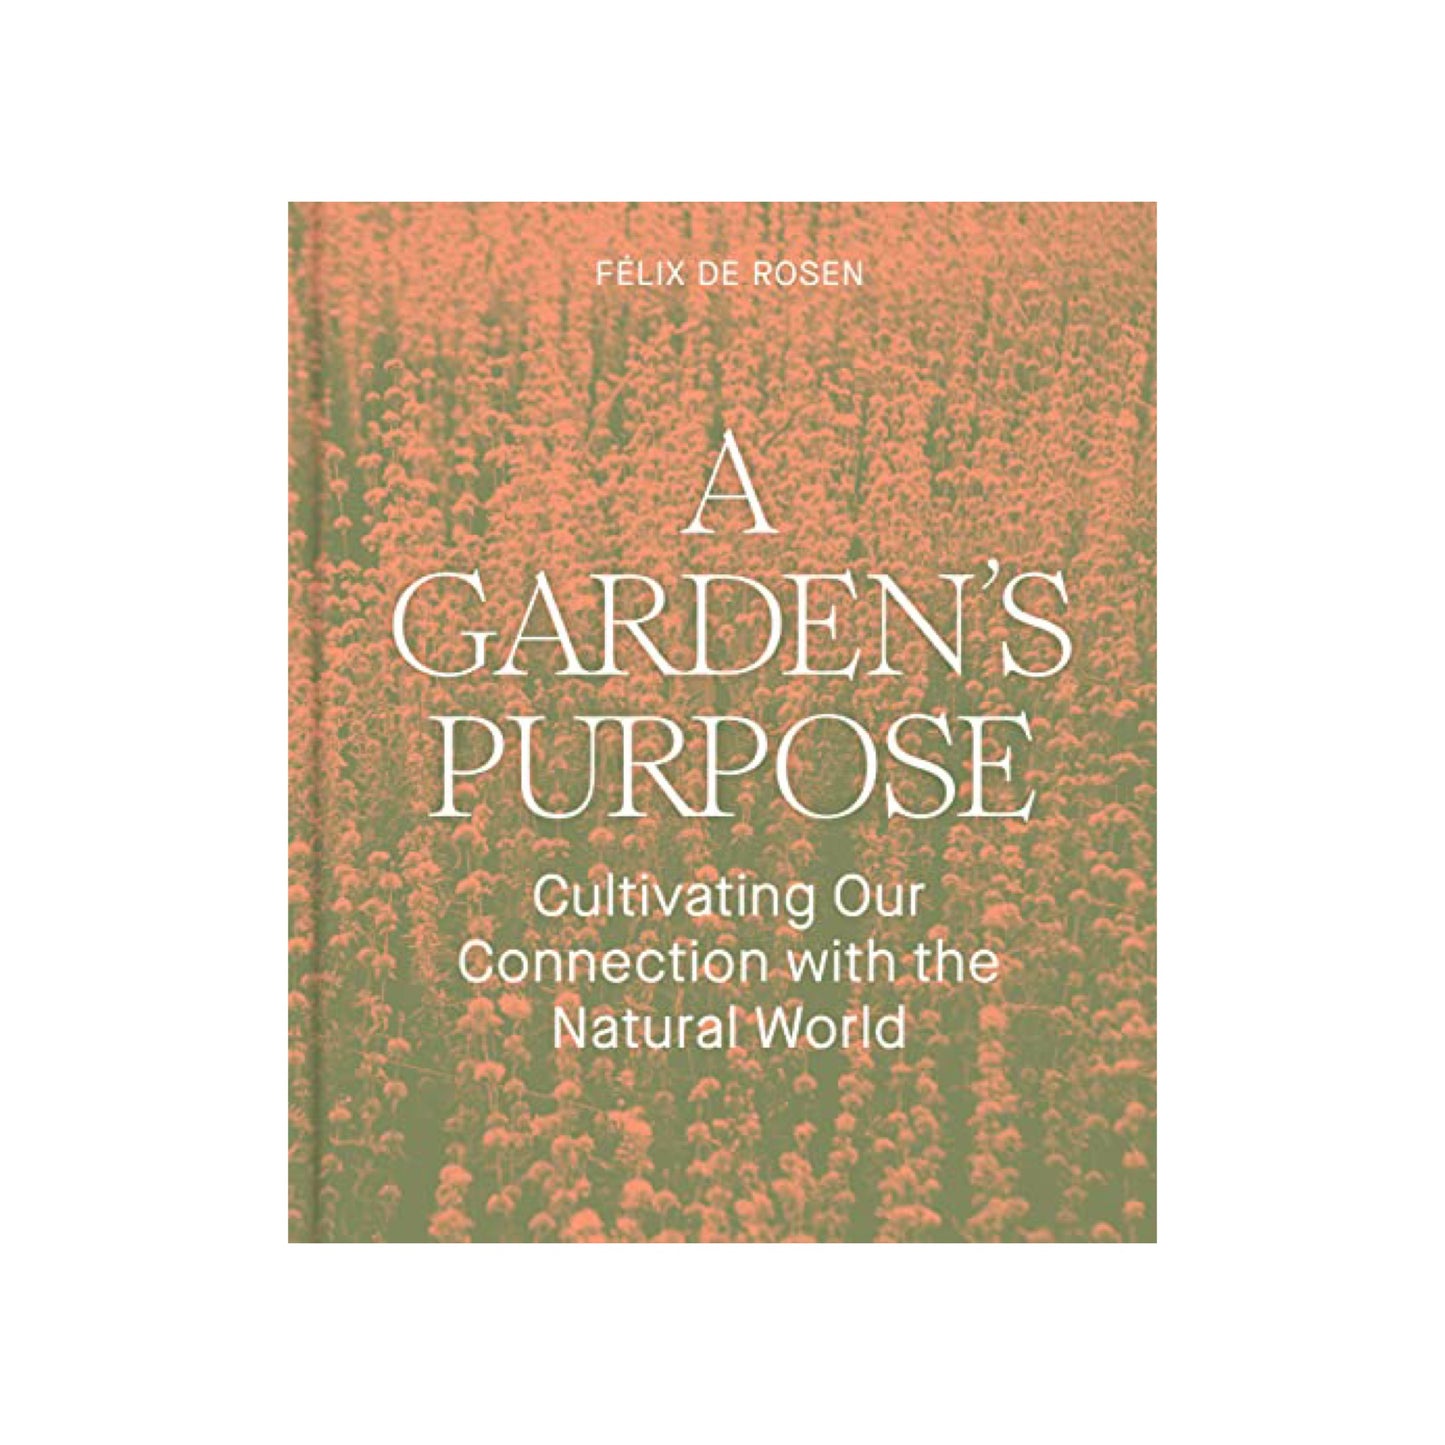 a garden's purpose: cultivating our connection with the natural world